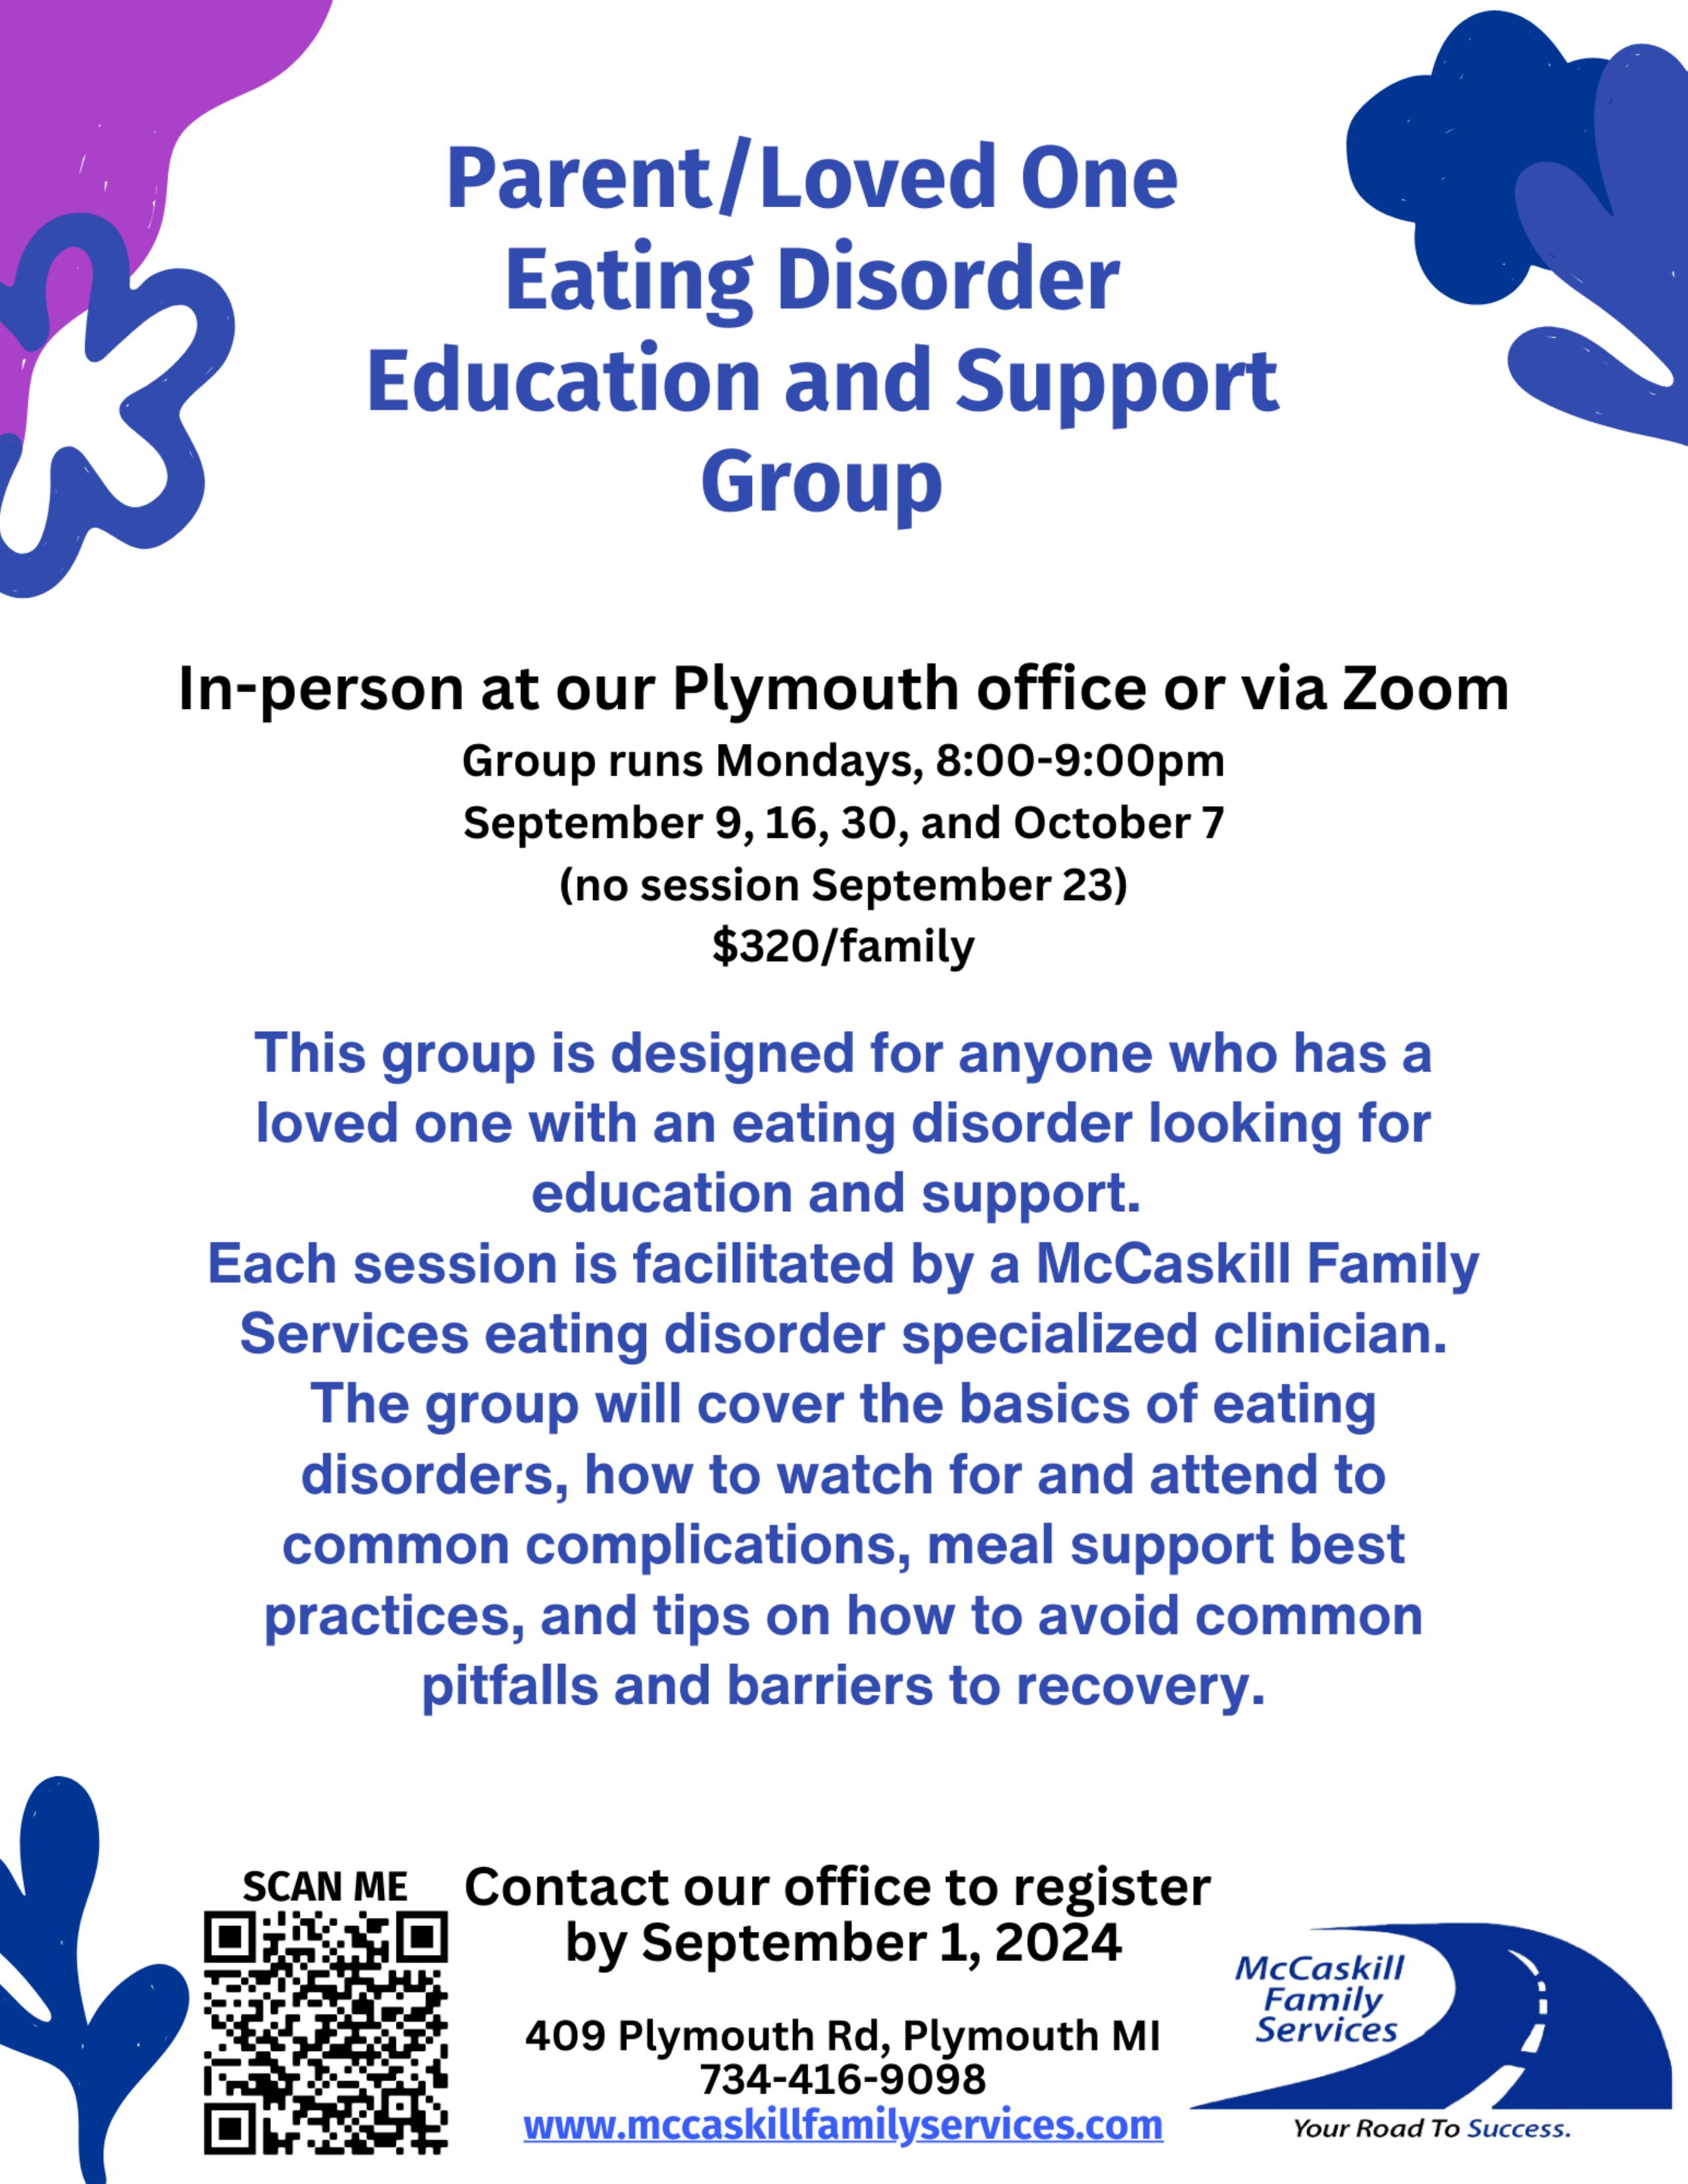 Parent-Loved One Eating Disorder Education and Support Group - McCaskill Family Services - September%20ED%20Parent%20Group%20Flyer